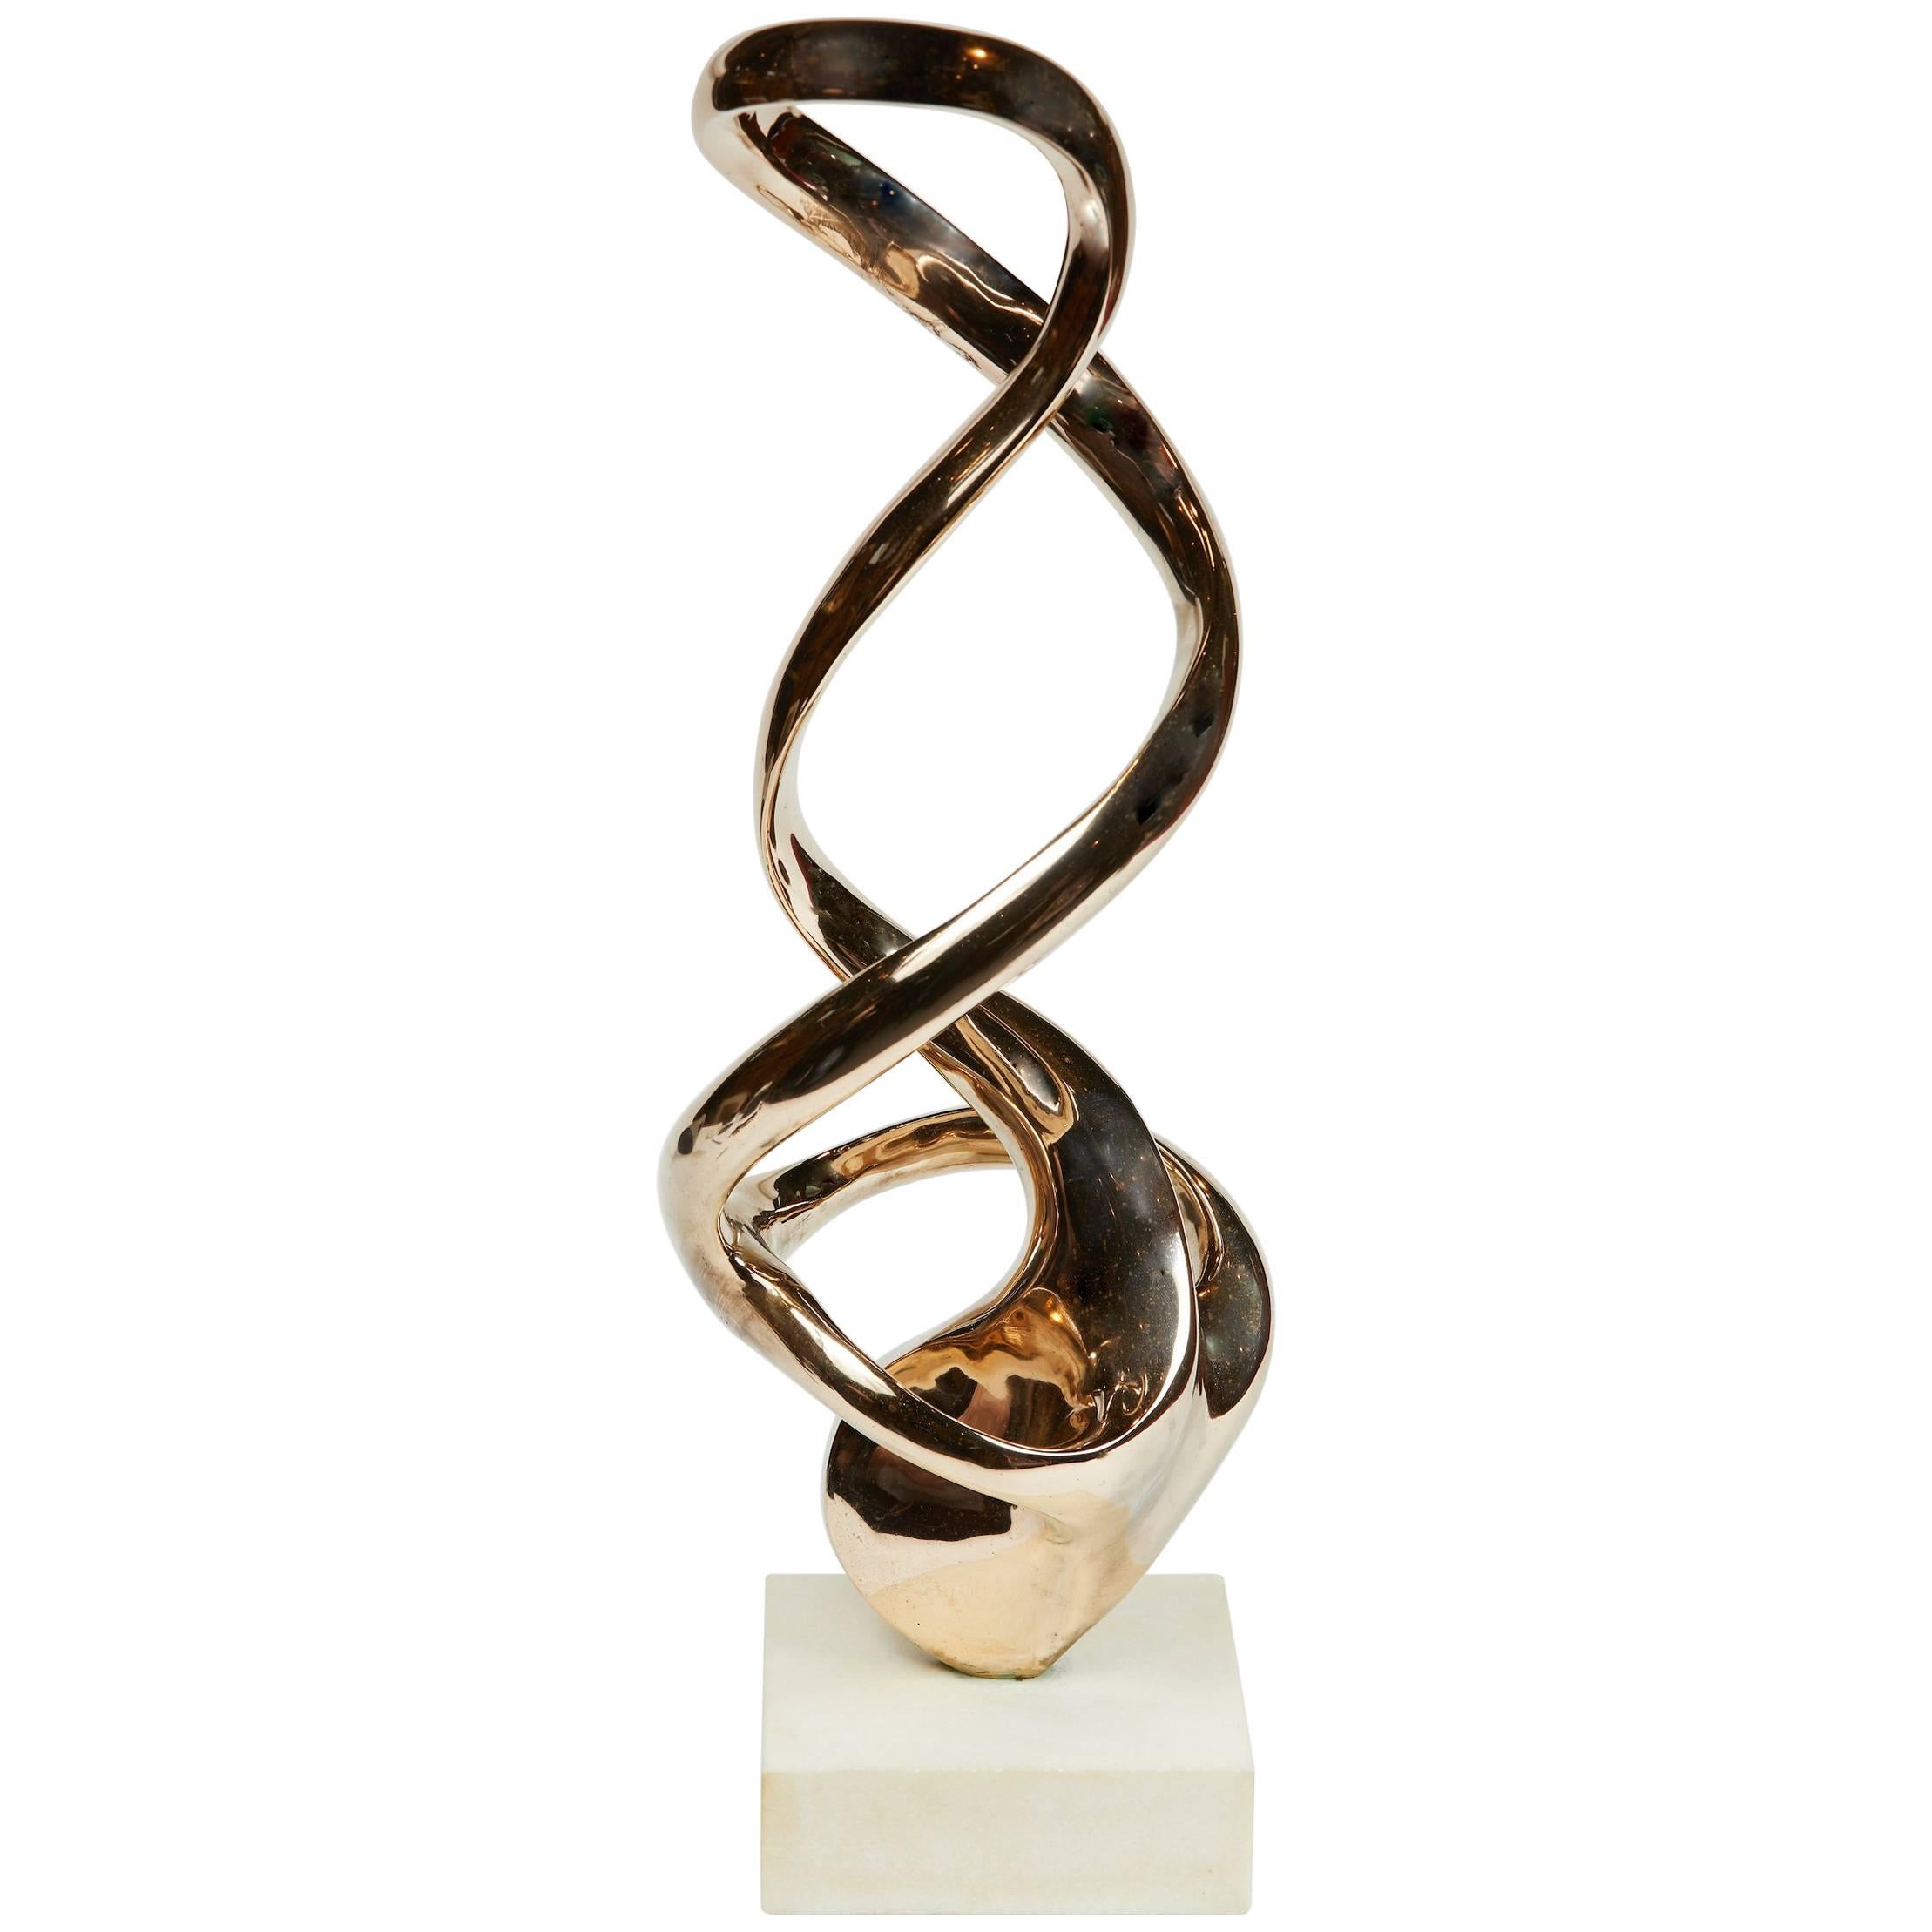 Abstract Polished Bronze Sculpture by Kieff